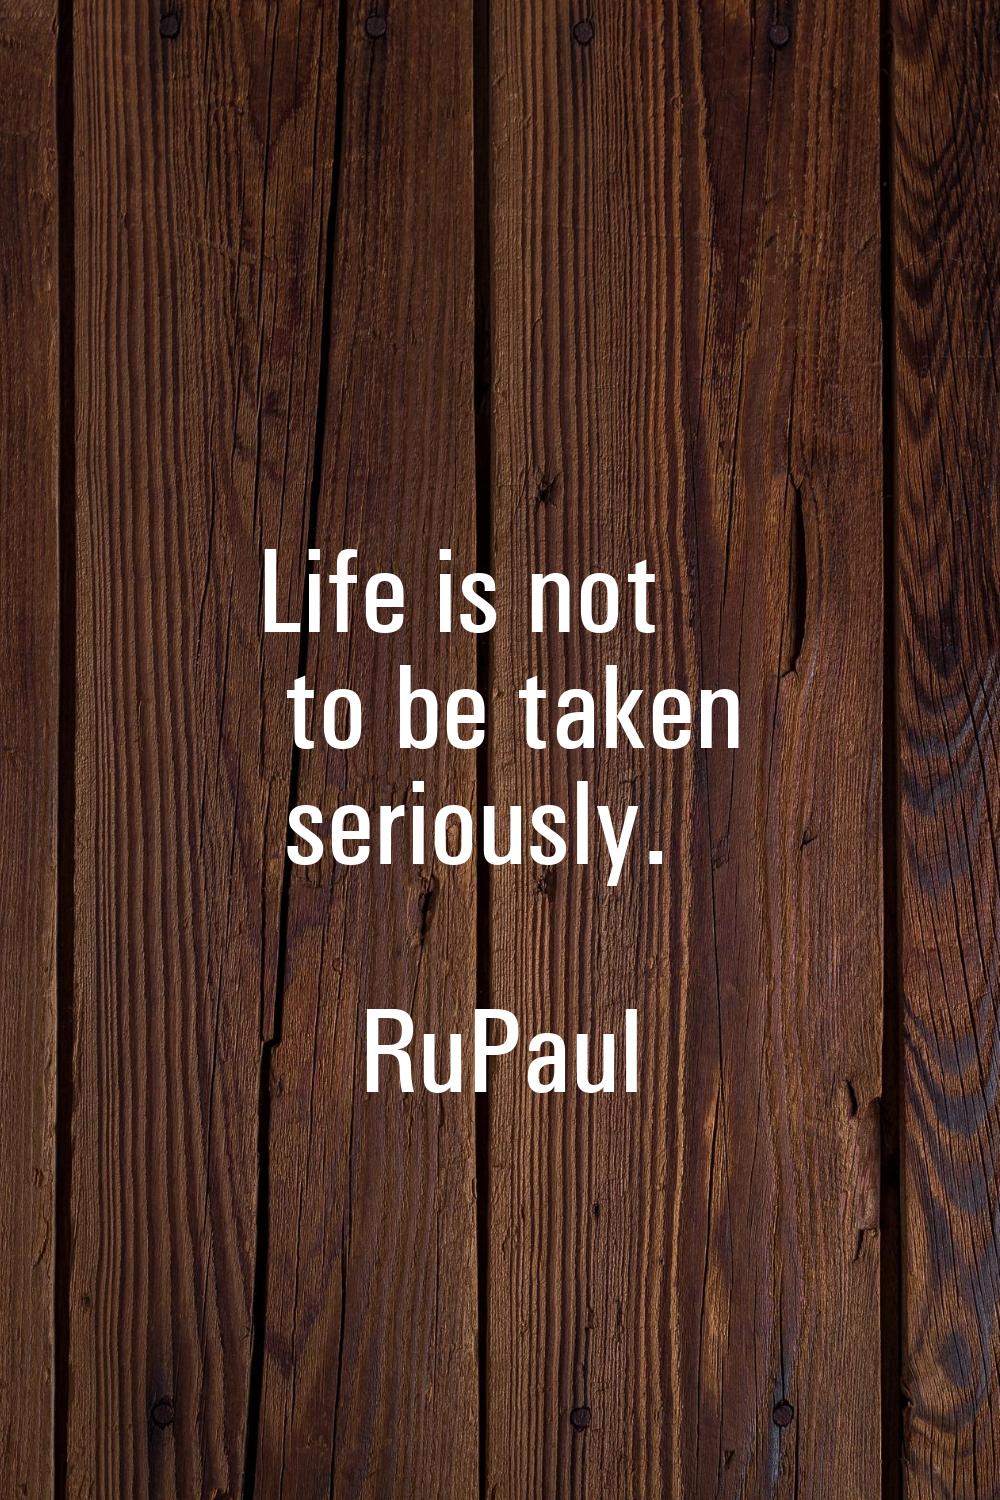 Life is not to be taken seriously.